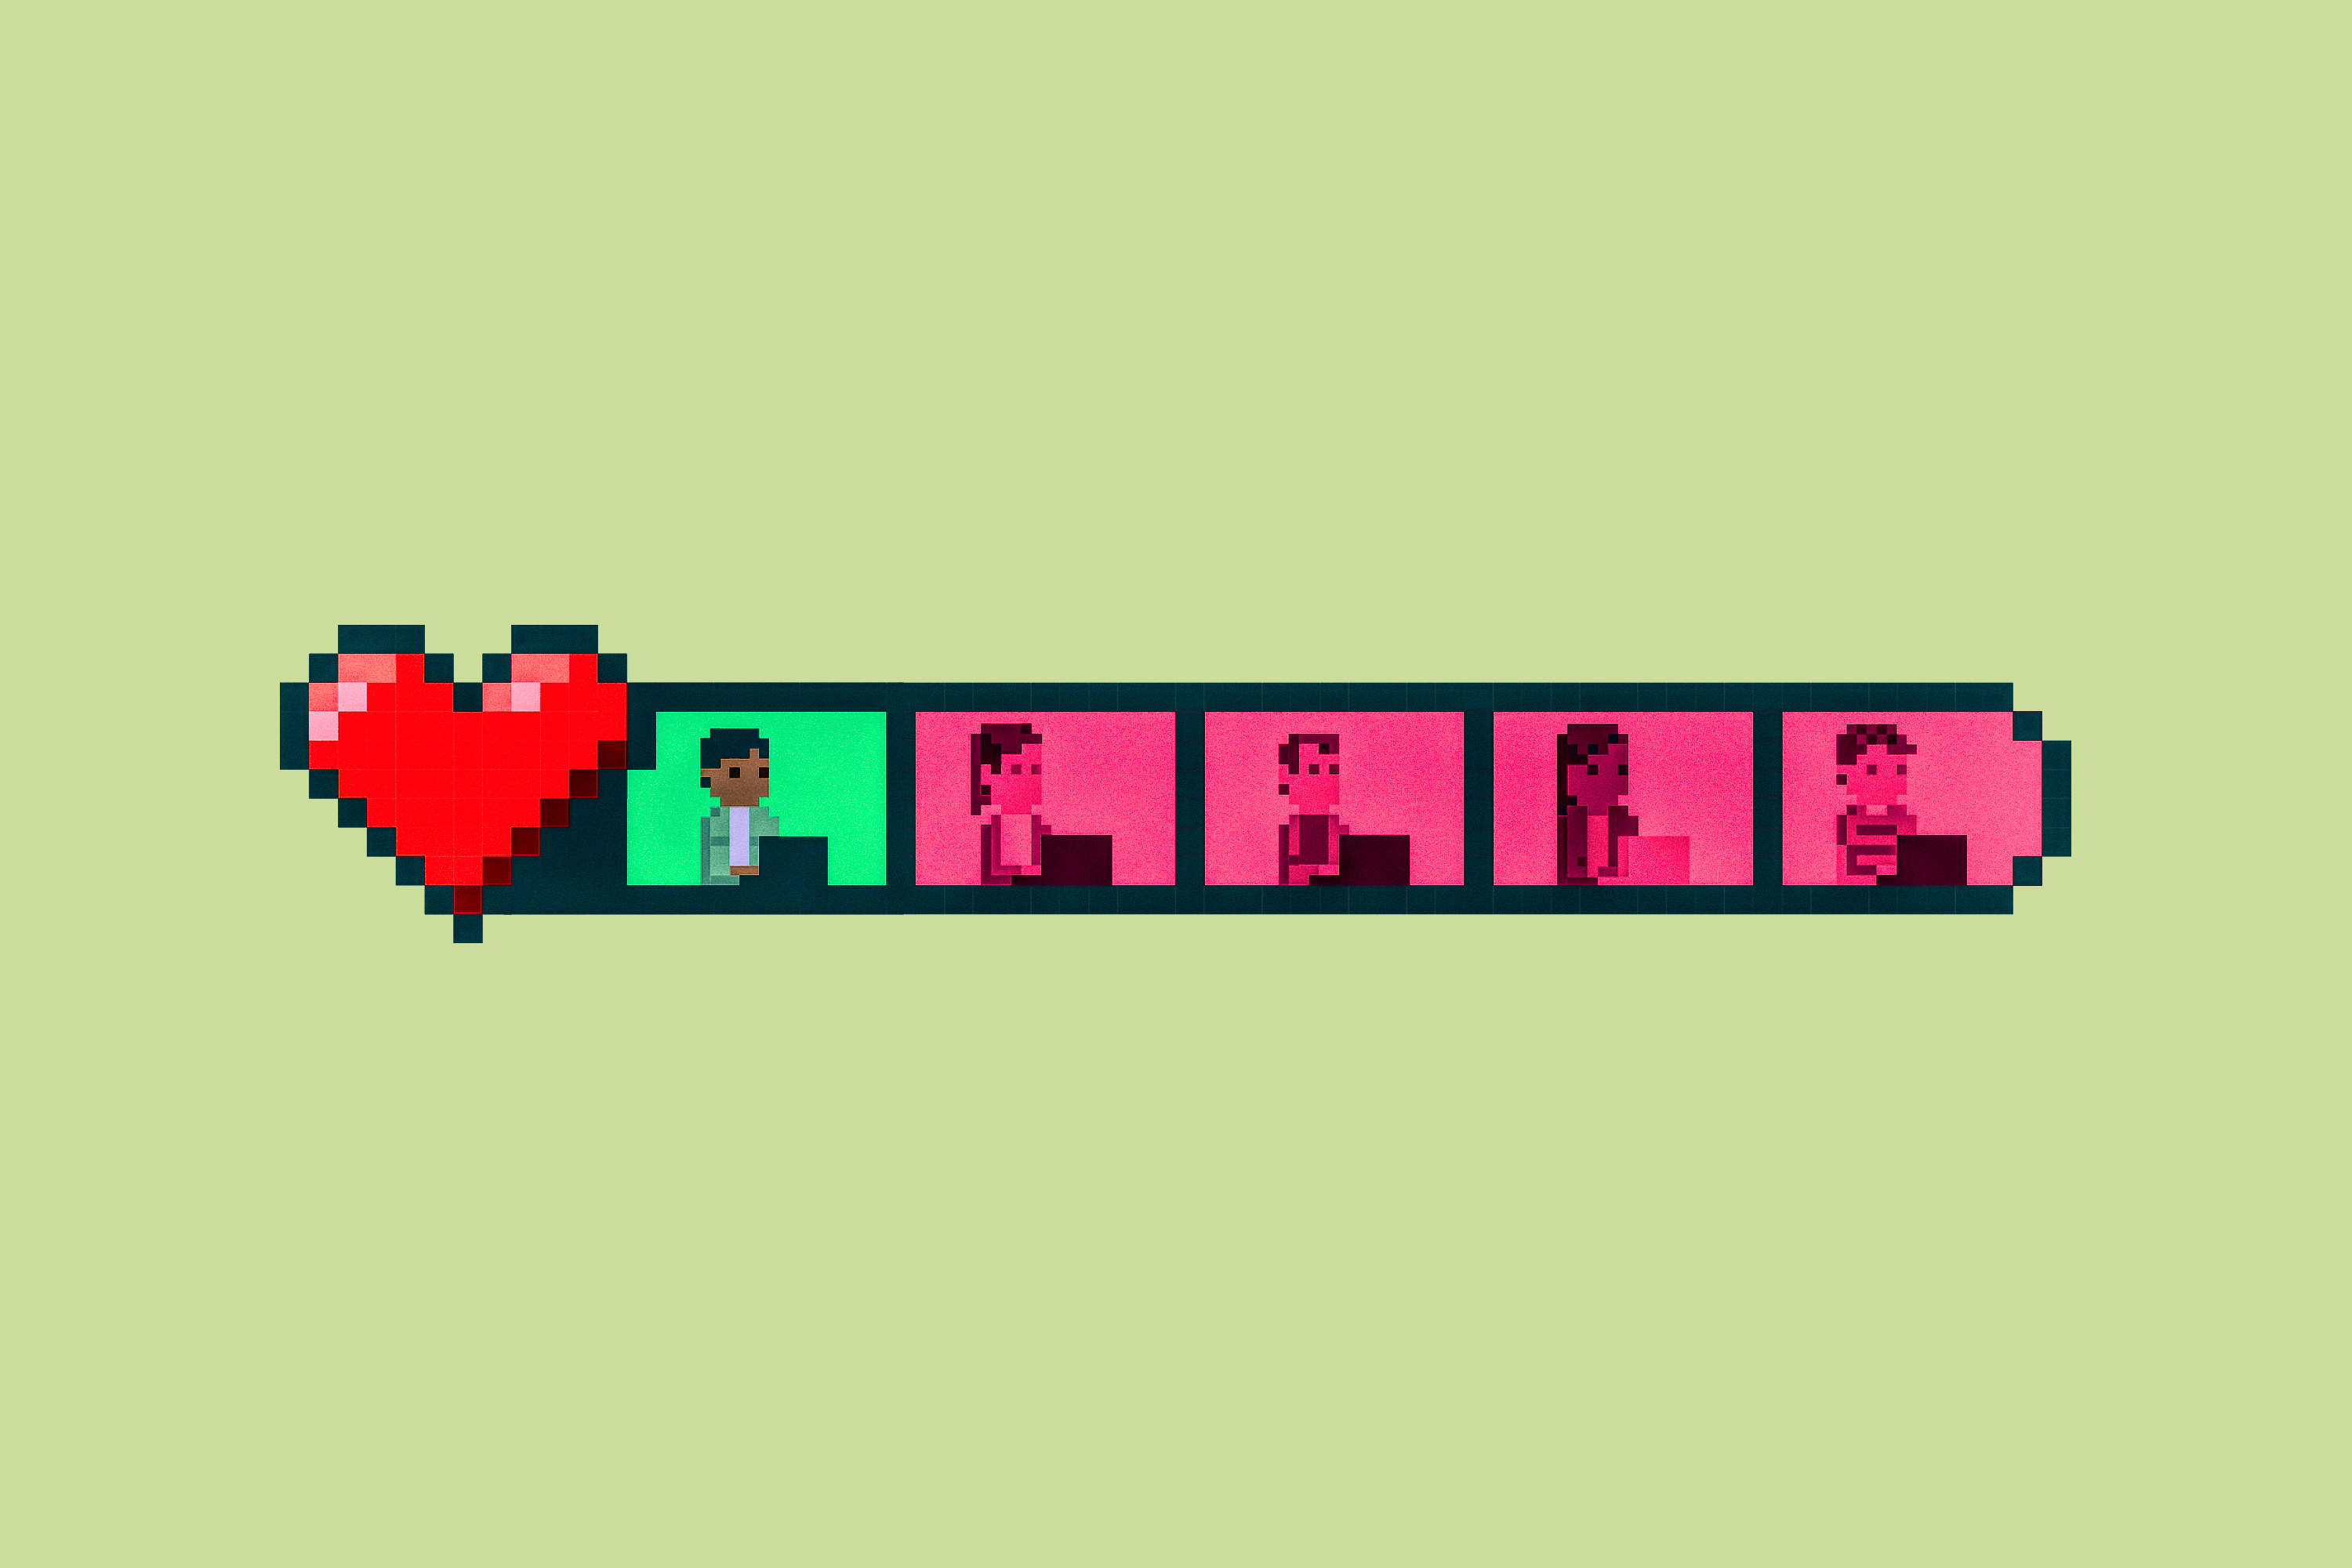 An illustration of a pixel video game health bar with a heart followed by pixel people.